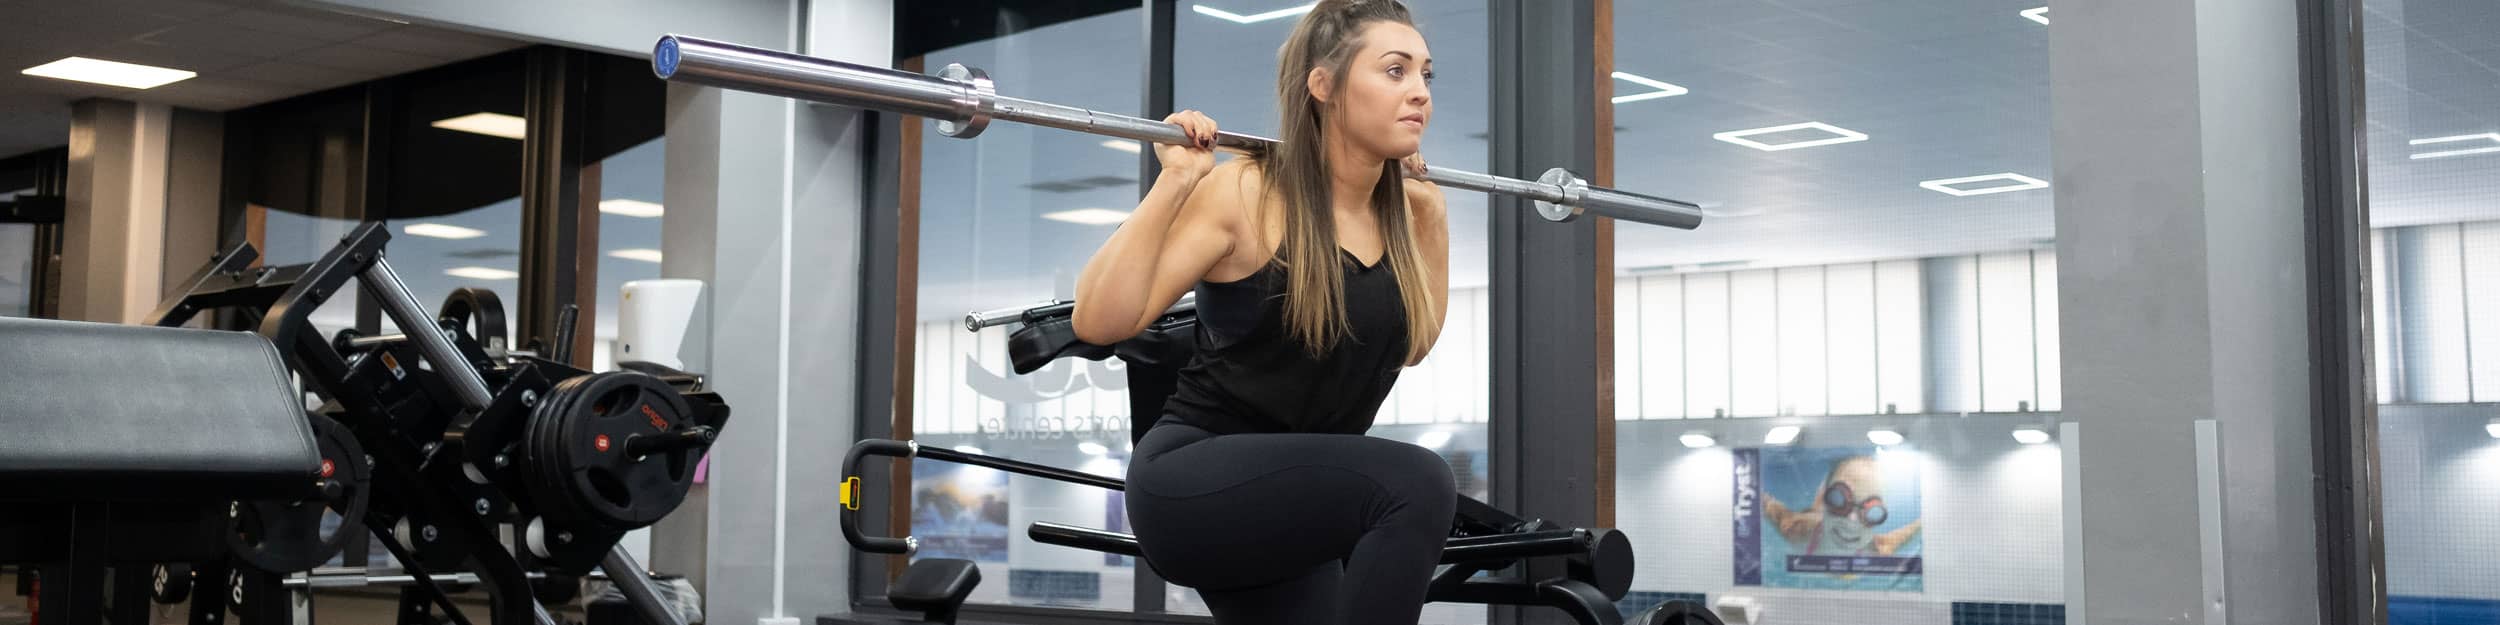 Join Active NL - image showing woman working out in a gym